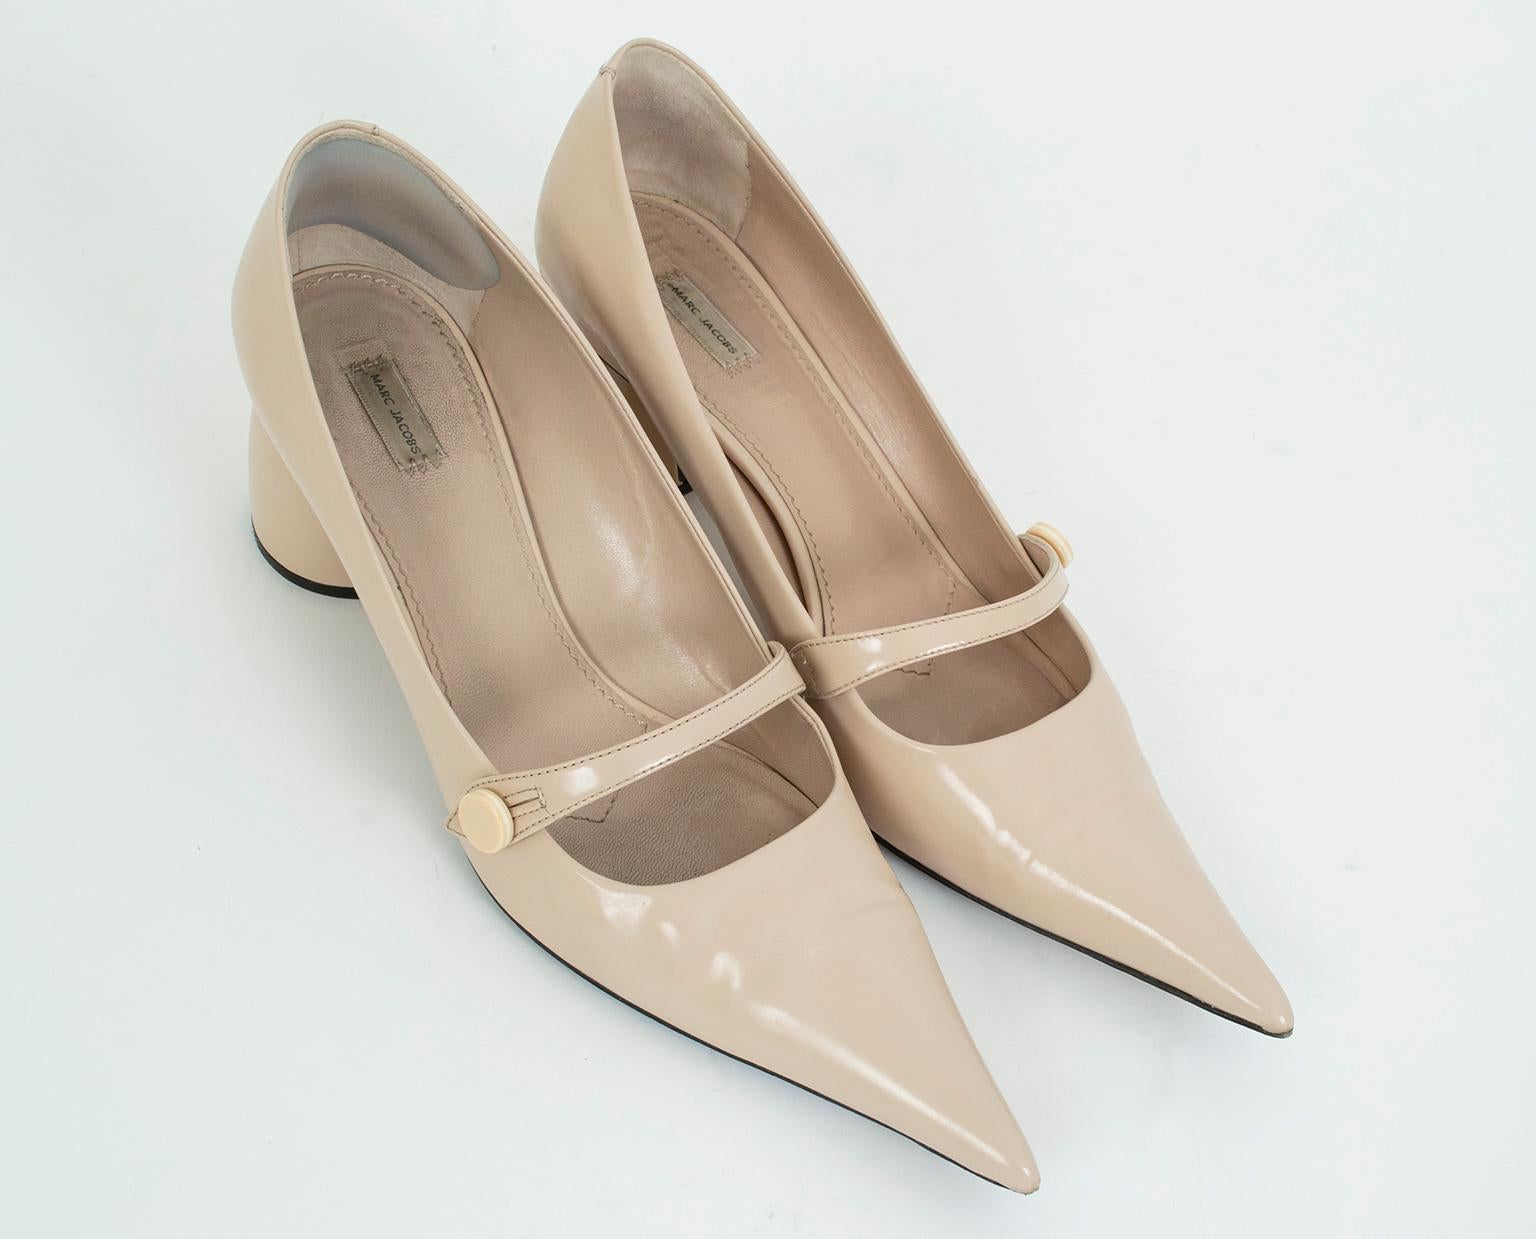 As only Marc Jacobs can, these Mary Janes include all the hallmarks of the classic shoe with a “left of center” slant. Featuring an extra-long pointed toe and rounded--almost-spherical--heel, these go-with-anything nude shoes are anything but boring